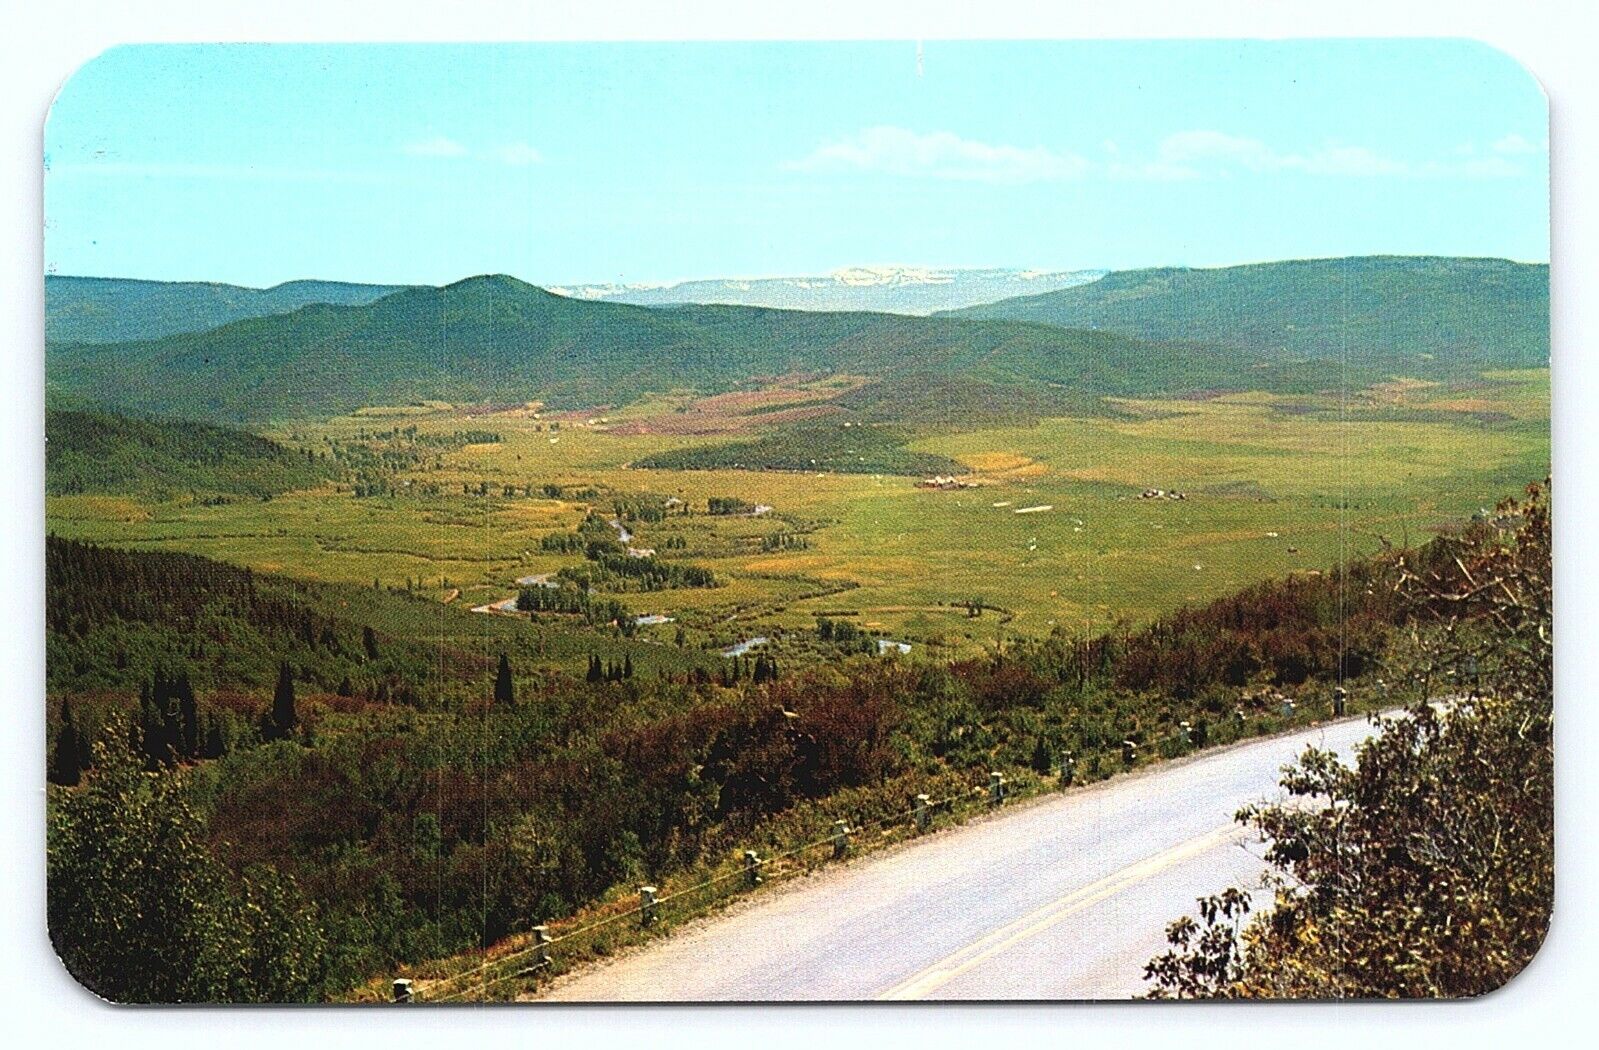 Yampa River Valley from Rabbit Ear Pass Hwy 40 Steamboat Springs CO Postcard C22